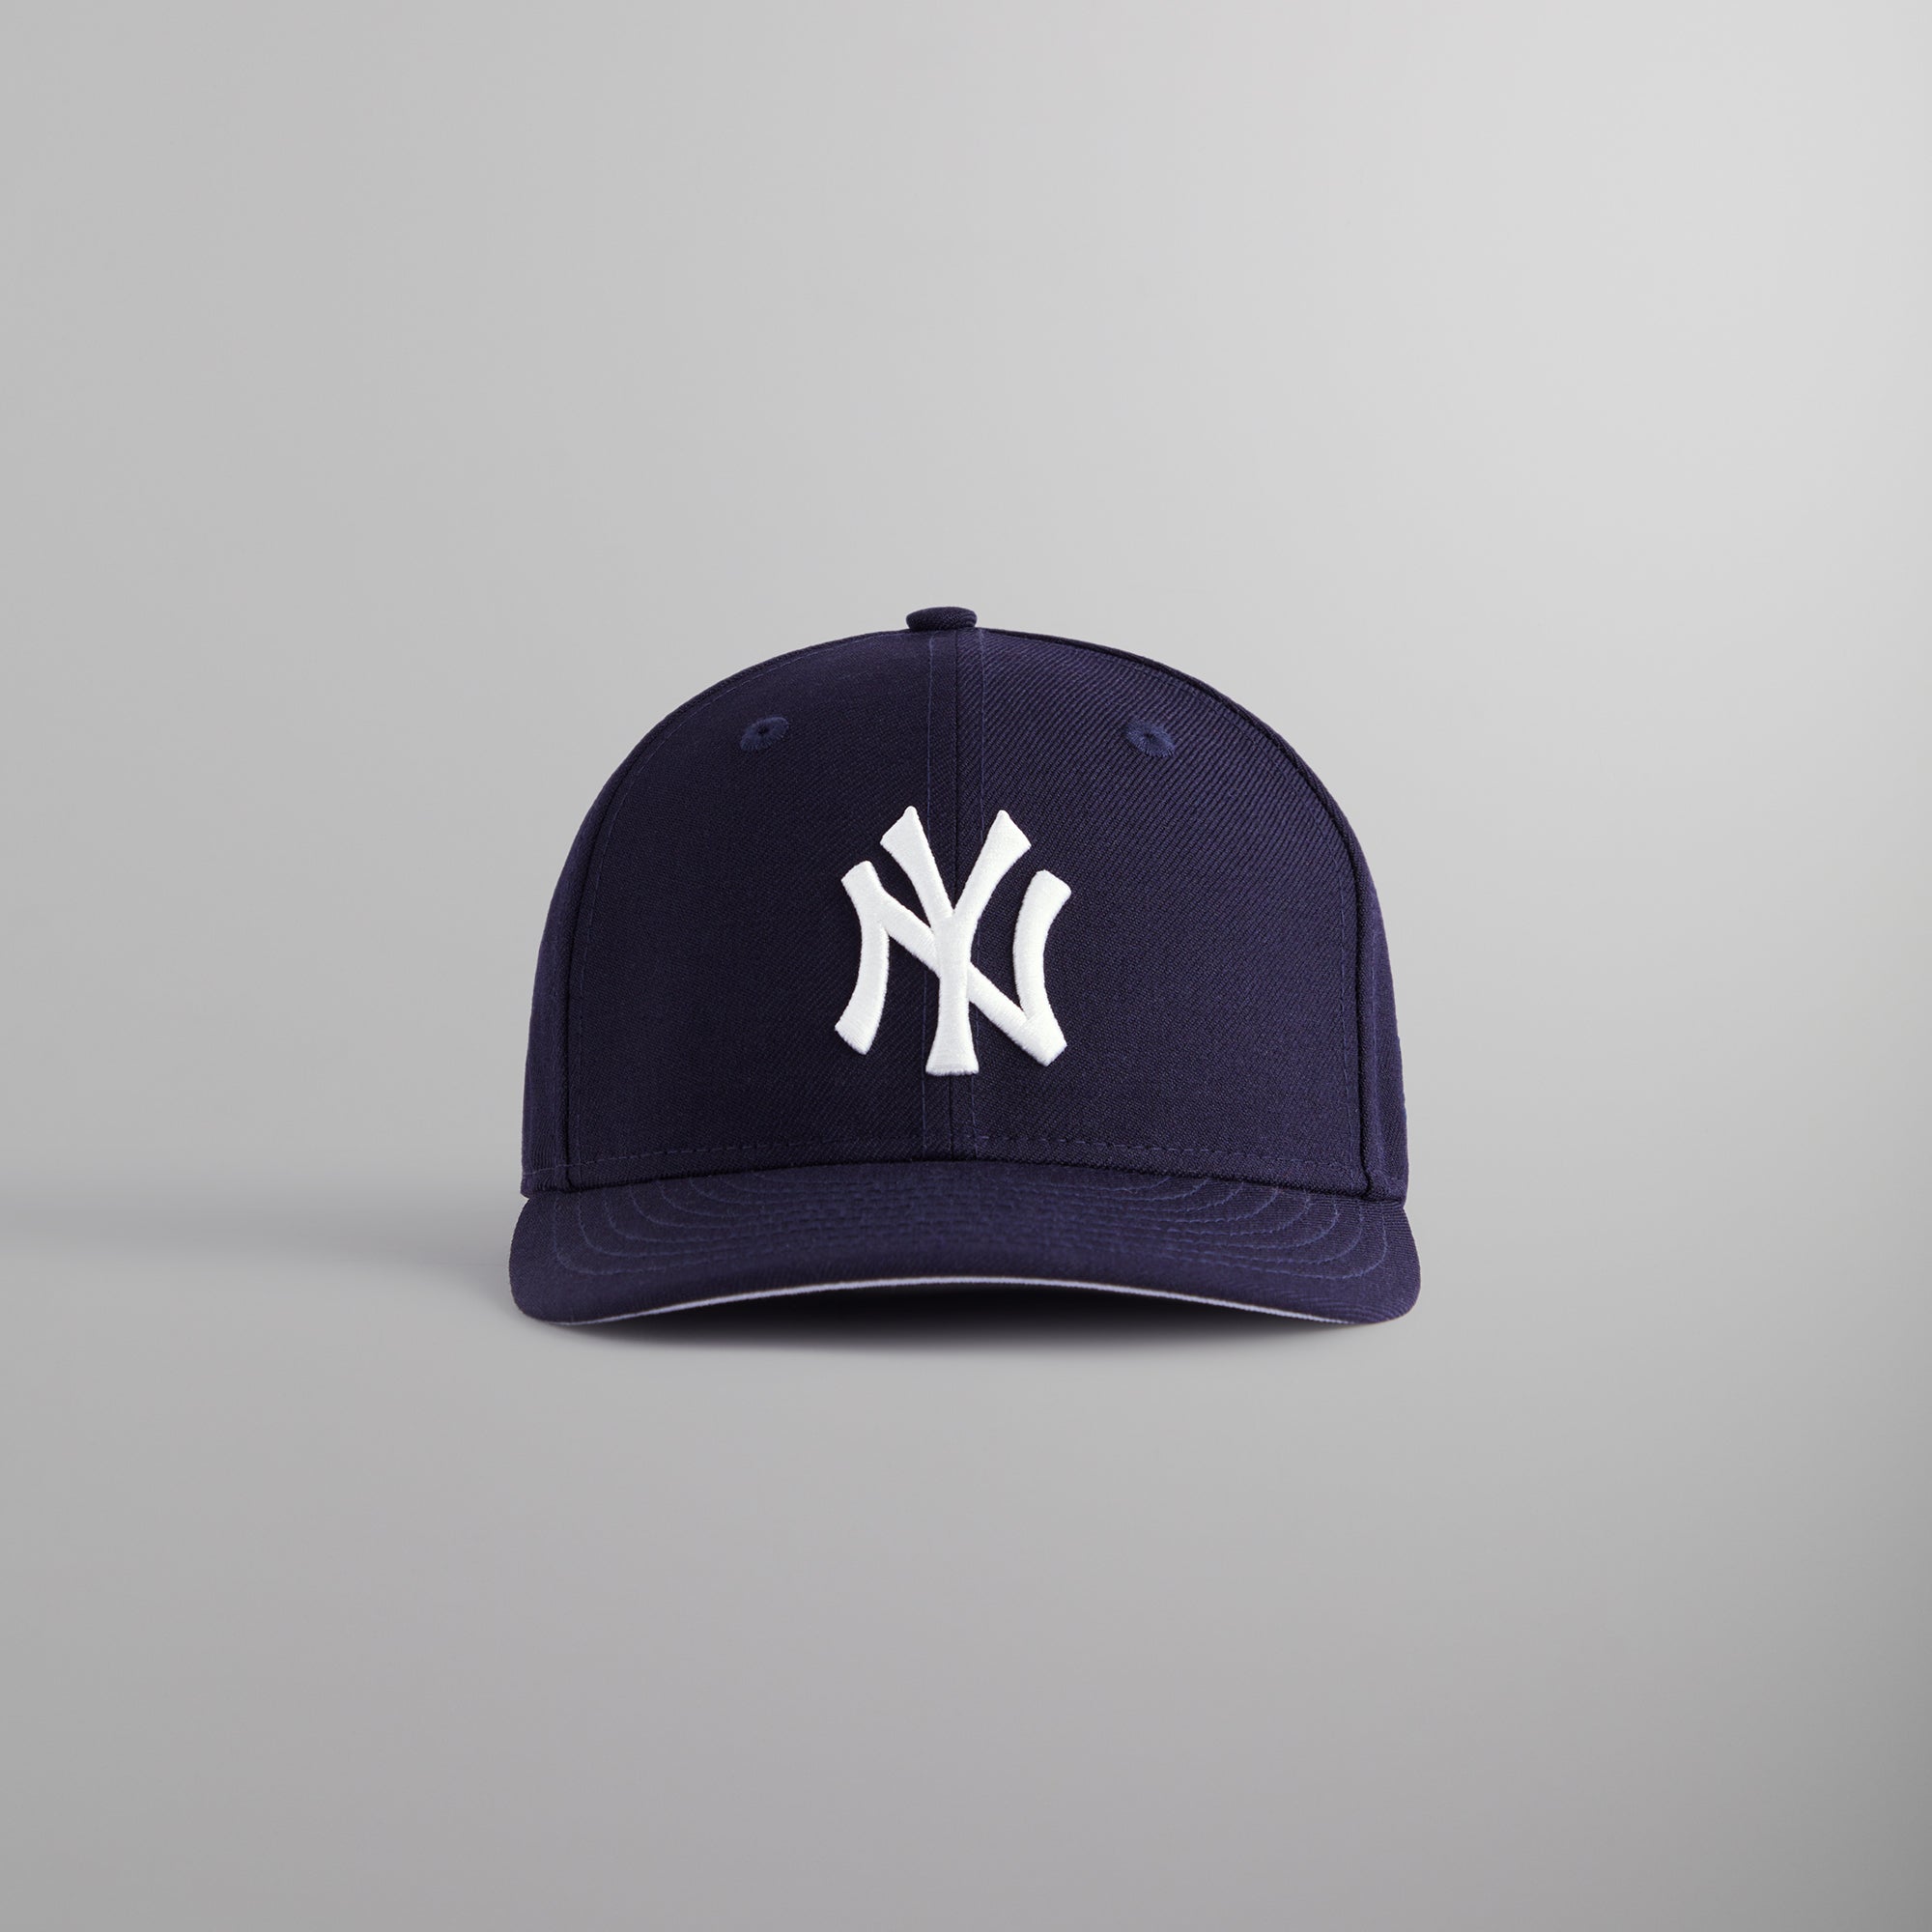 Kith & New Era for the New York Yankees 59FIFTY - Navy PH